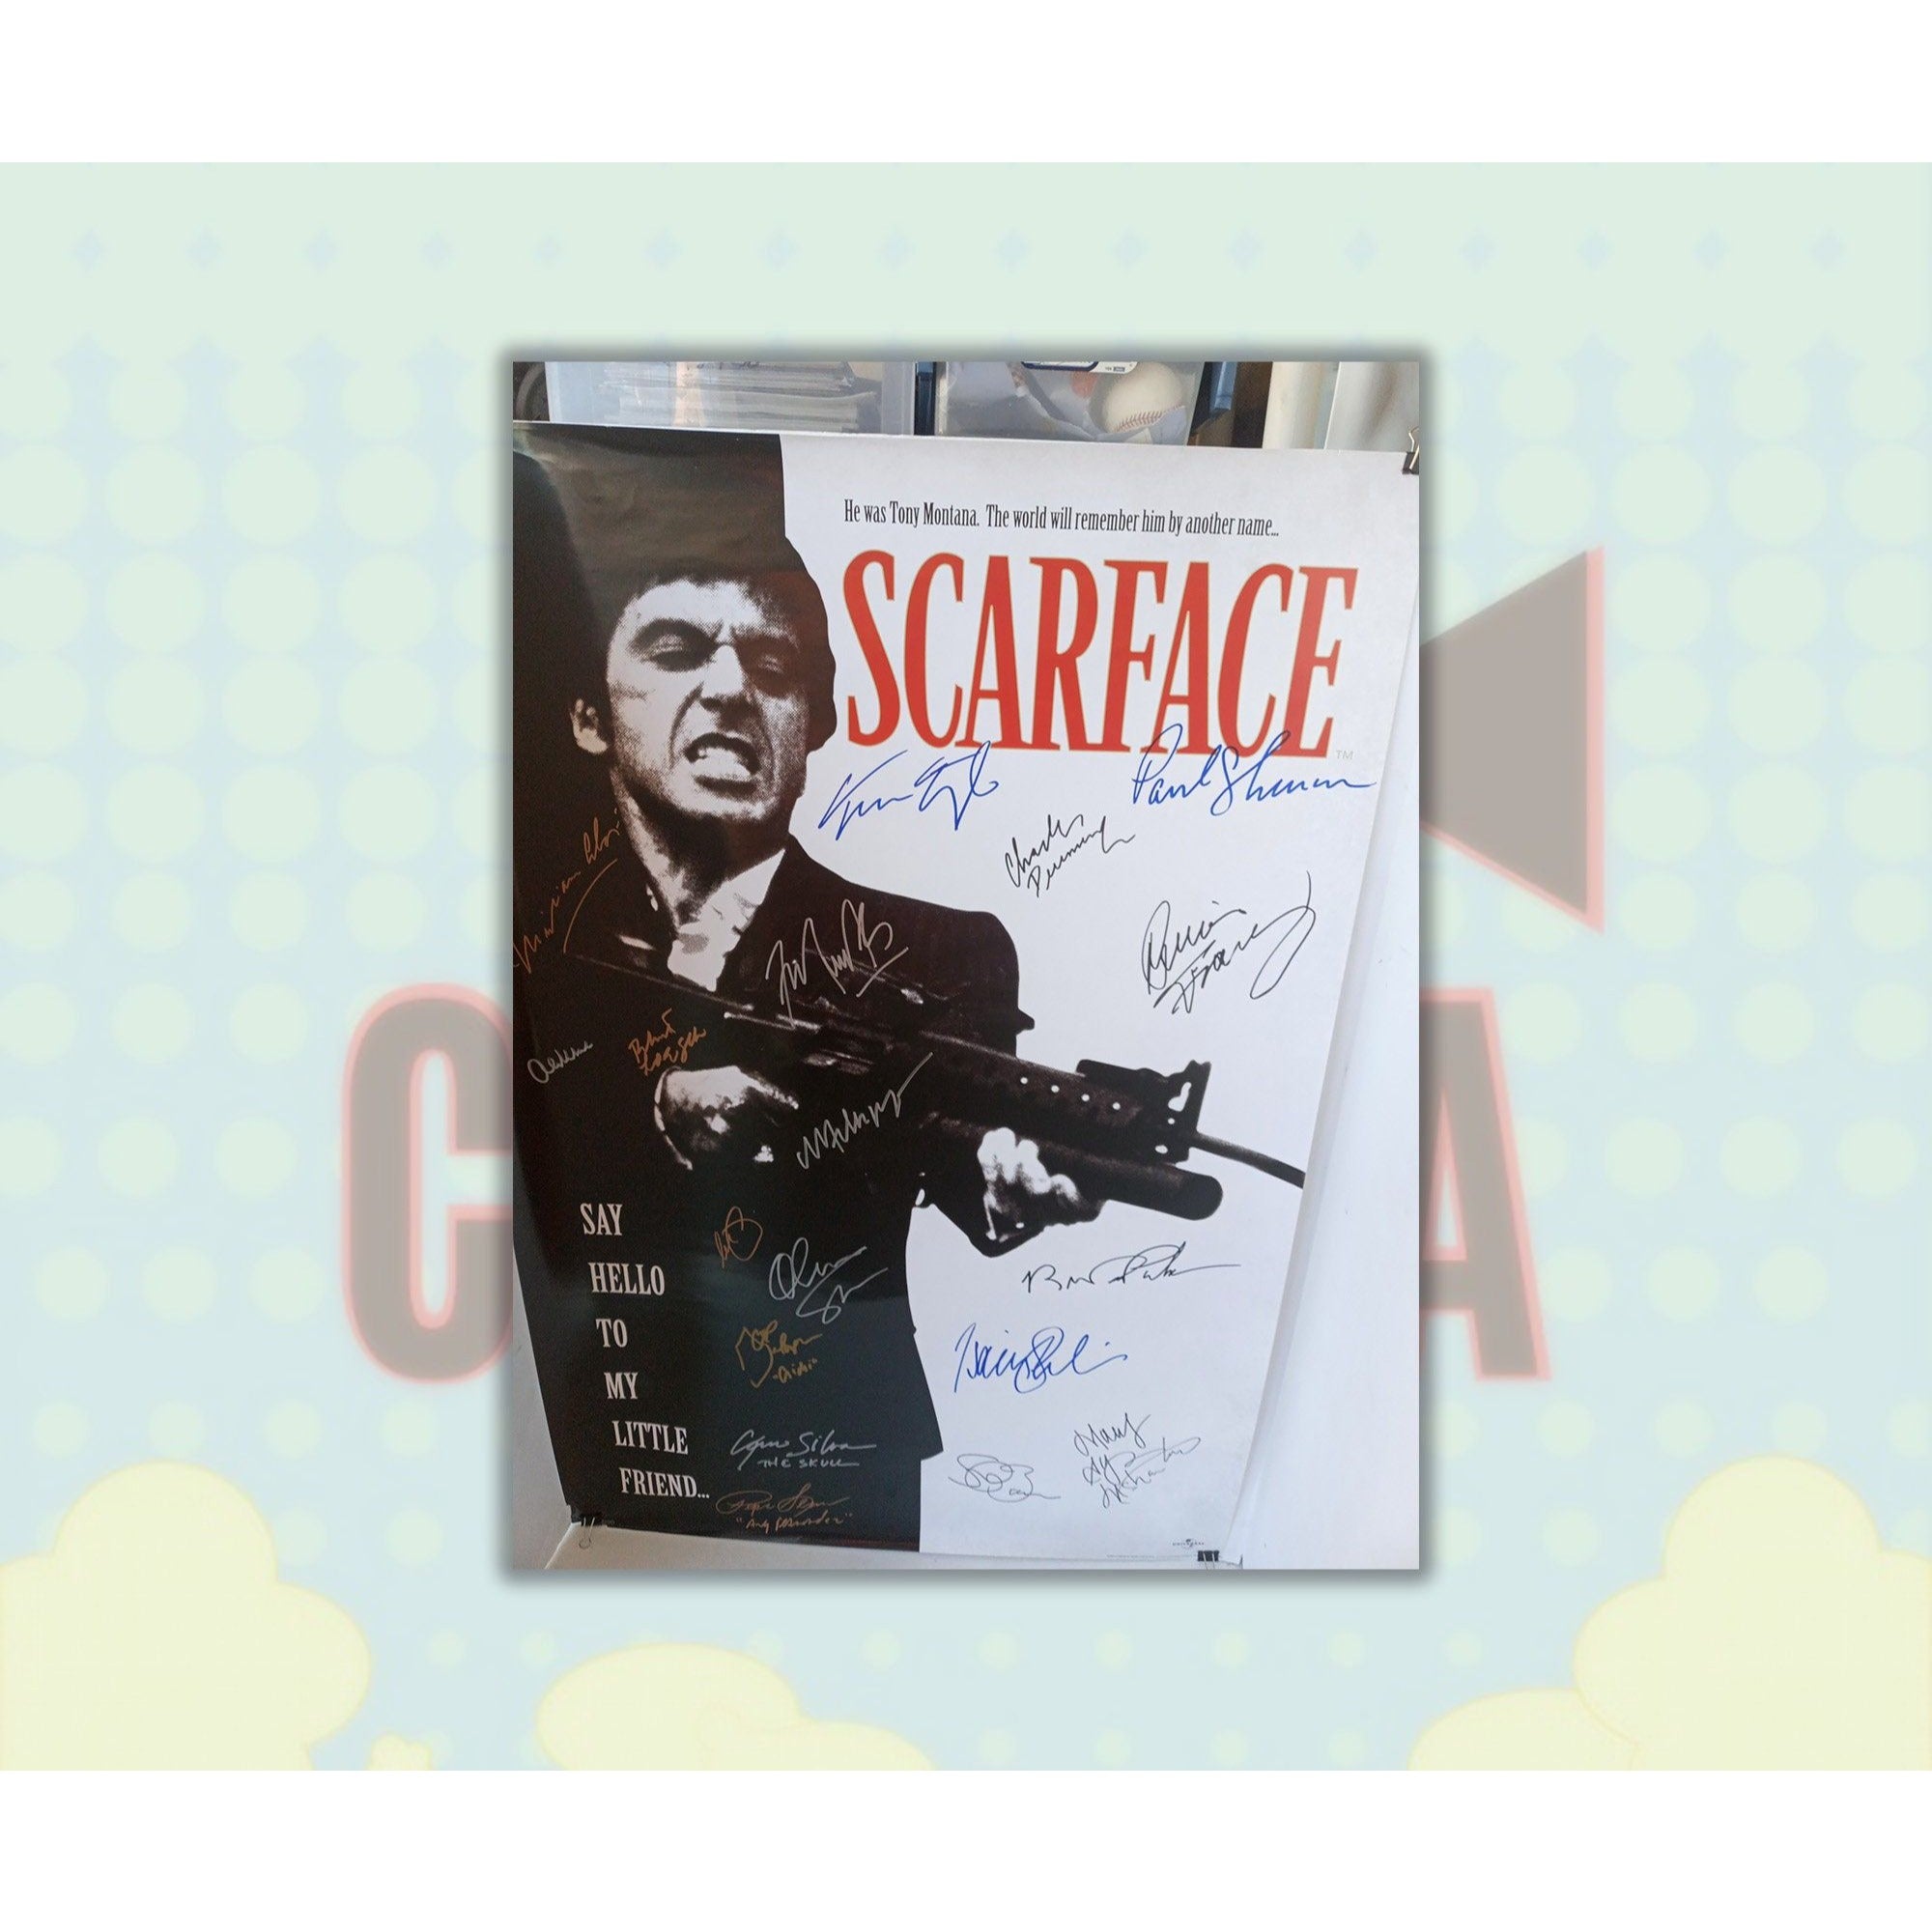 Scarface Al Pacino, Oliver Stone, Michelle Pfeiffer, cast signed original movie poster 24x36 with proof